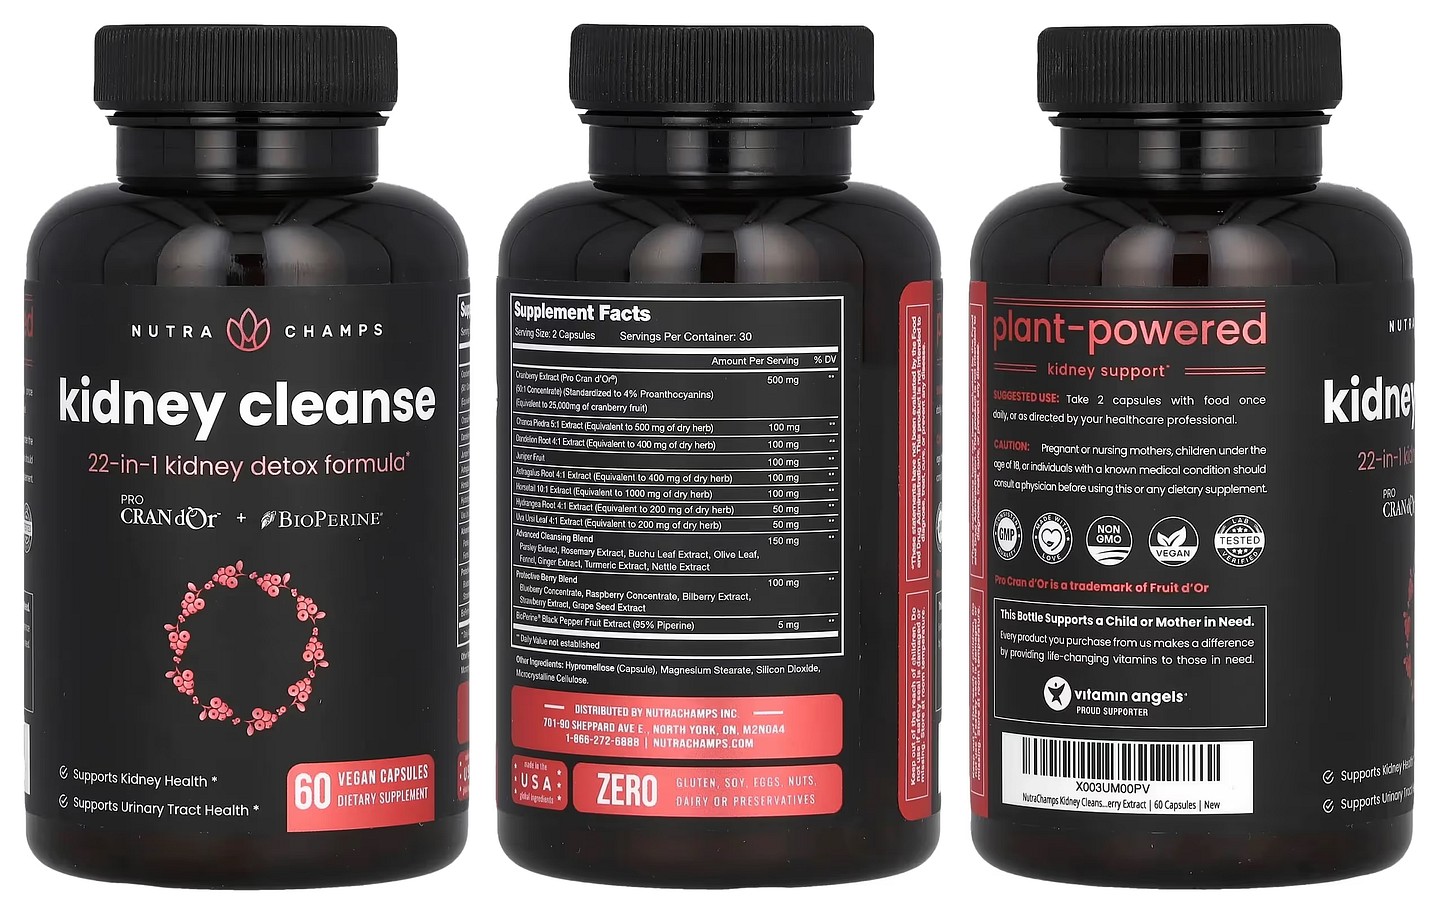 NutraChamps, Kidney Cleanse packaging